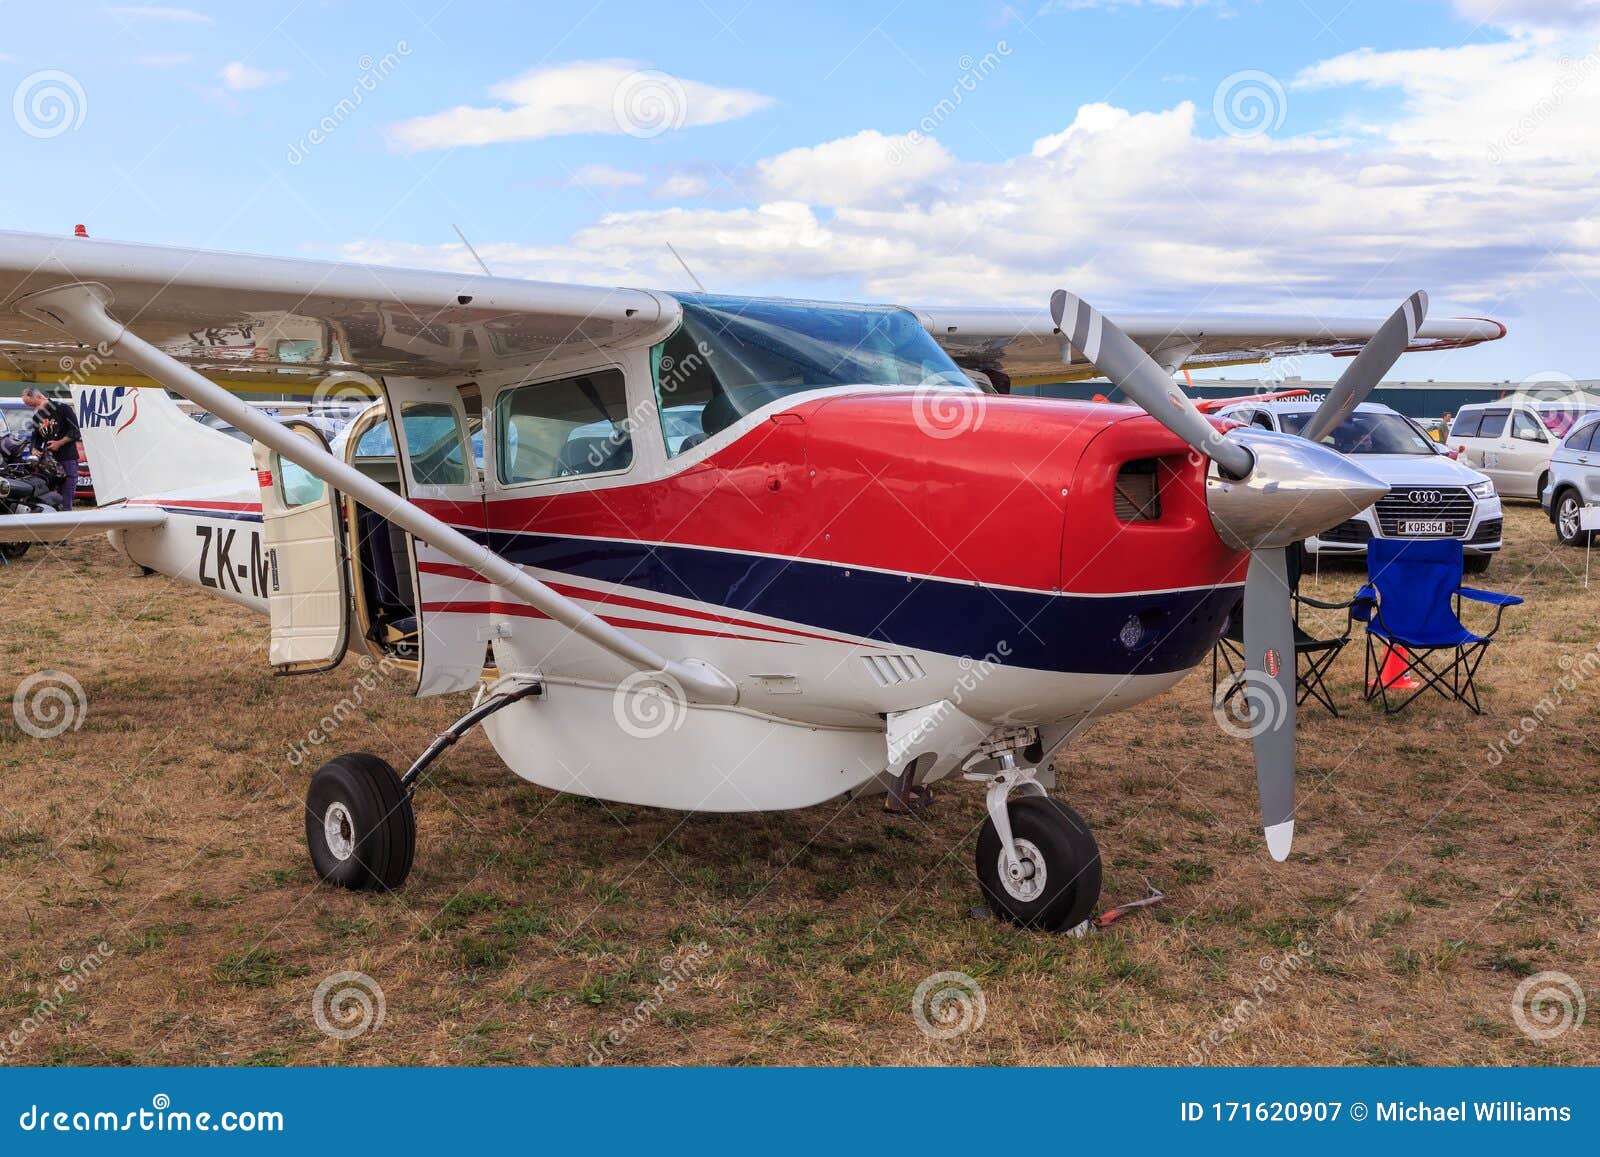 Cessna U206G Light Aircraft on the Ground Editorial Photography - Image of airplane, little: 171620907